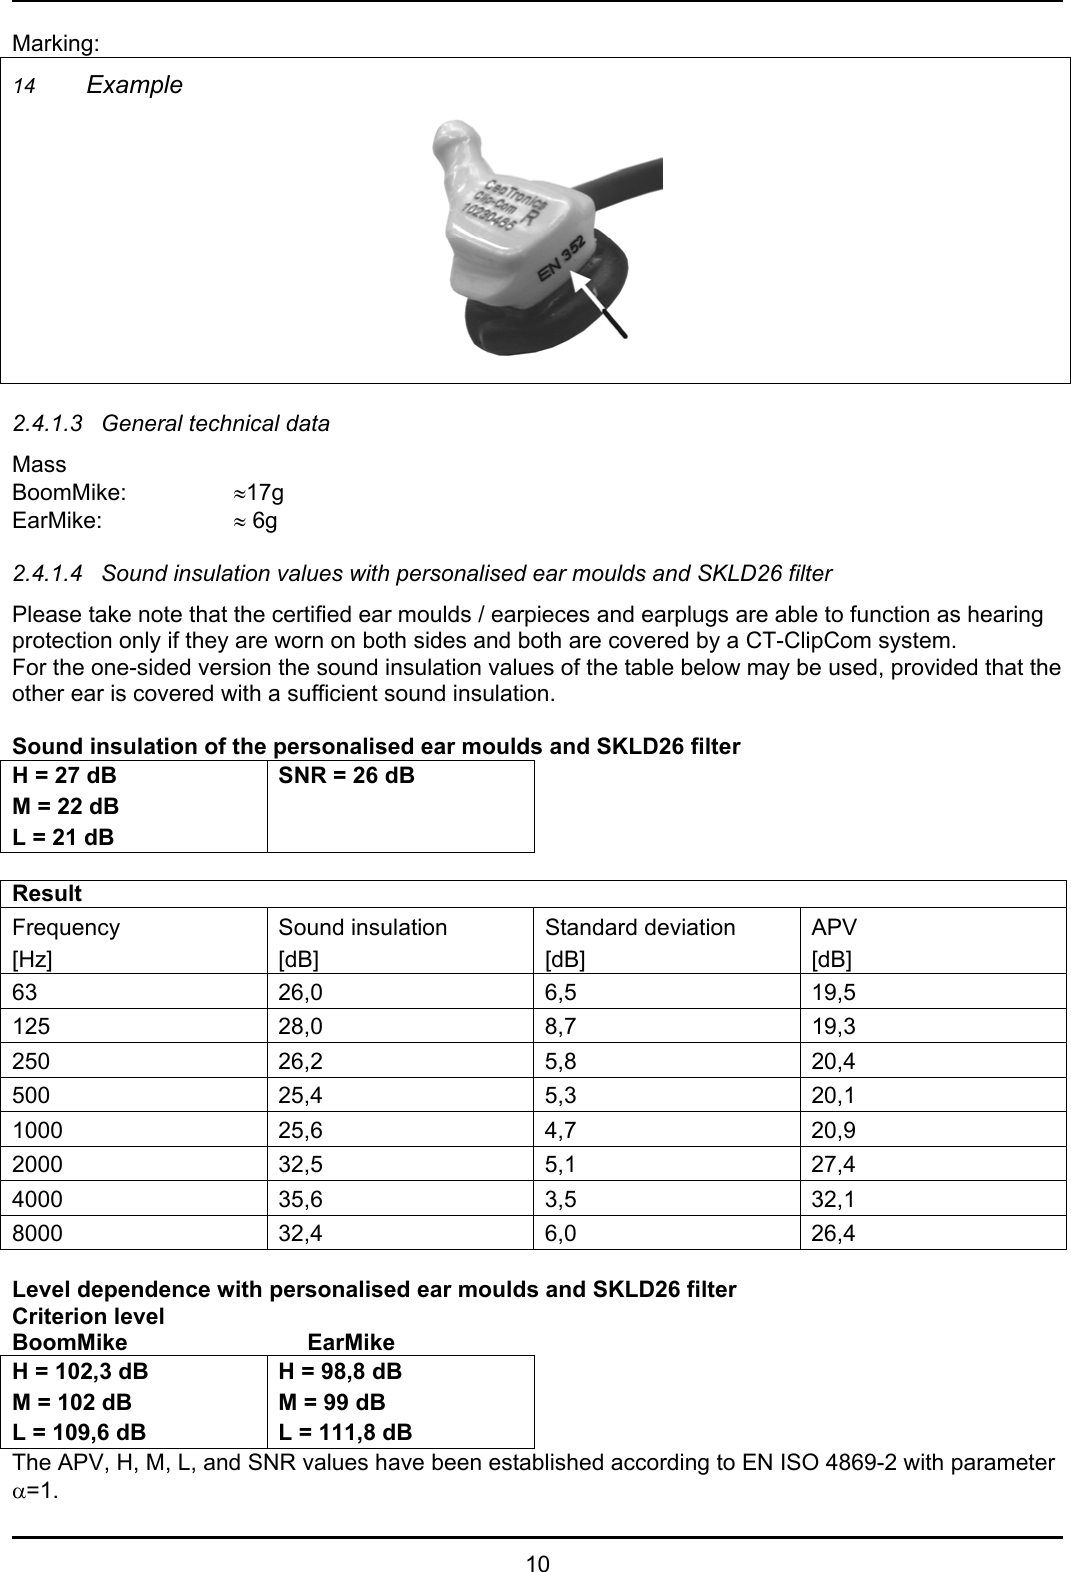   10 Marking: 14 Example  2.4.1.3  General technical data Mass  BoomMike:   ≈17g EarMike:   ≈ 6g  2.4.1.4  Sound insulation values with personalised ear moulds and SKLD26 filter Please take note that the certified ear moulds / earpieces and earplugs are able to function as hearing protection only if they are worn on both sides and both are covered by a CT-ClipCom system. For the one-sided version the sound insulation values of the table below may be used, provided that the other ear is covered with a sufficient sound insulation.  Sound insulation of the personalised ear moulds and SKLD26 filter H = 27 dB M = 22 dB L = 21 dB SNR = 26 dB  Result Frequency [Hz] Sound insulation [dB] Standard deviation [dB] APV [dB] 63 26,0 6,5 19,5 125 28,0 8,7  19,3 250 26,2 5,8  20,4 500 25,4 5,3  20,1 1000 25,6  4,7  20,9 2000 32,5  5,1  27,4 4000 35,6  3,5  32,1 8000 32,4  6,0  26,4  Level dependence with personalised ear moulds and SKLD26 filter Criterion level BoomMike     EarMike H = 102,3 dB M = 102 dB L = 109,6 dB H = 98,8 dB M = 99 dB L = 111,8 dB The APV, H, M, L, and SNR values have been established according to EN ISO 4869-2 with parameter α=1. 